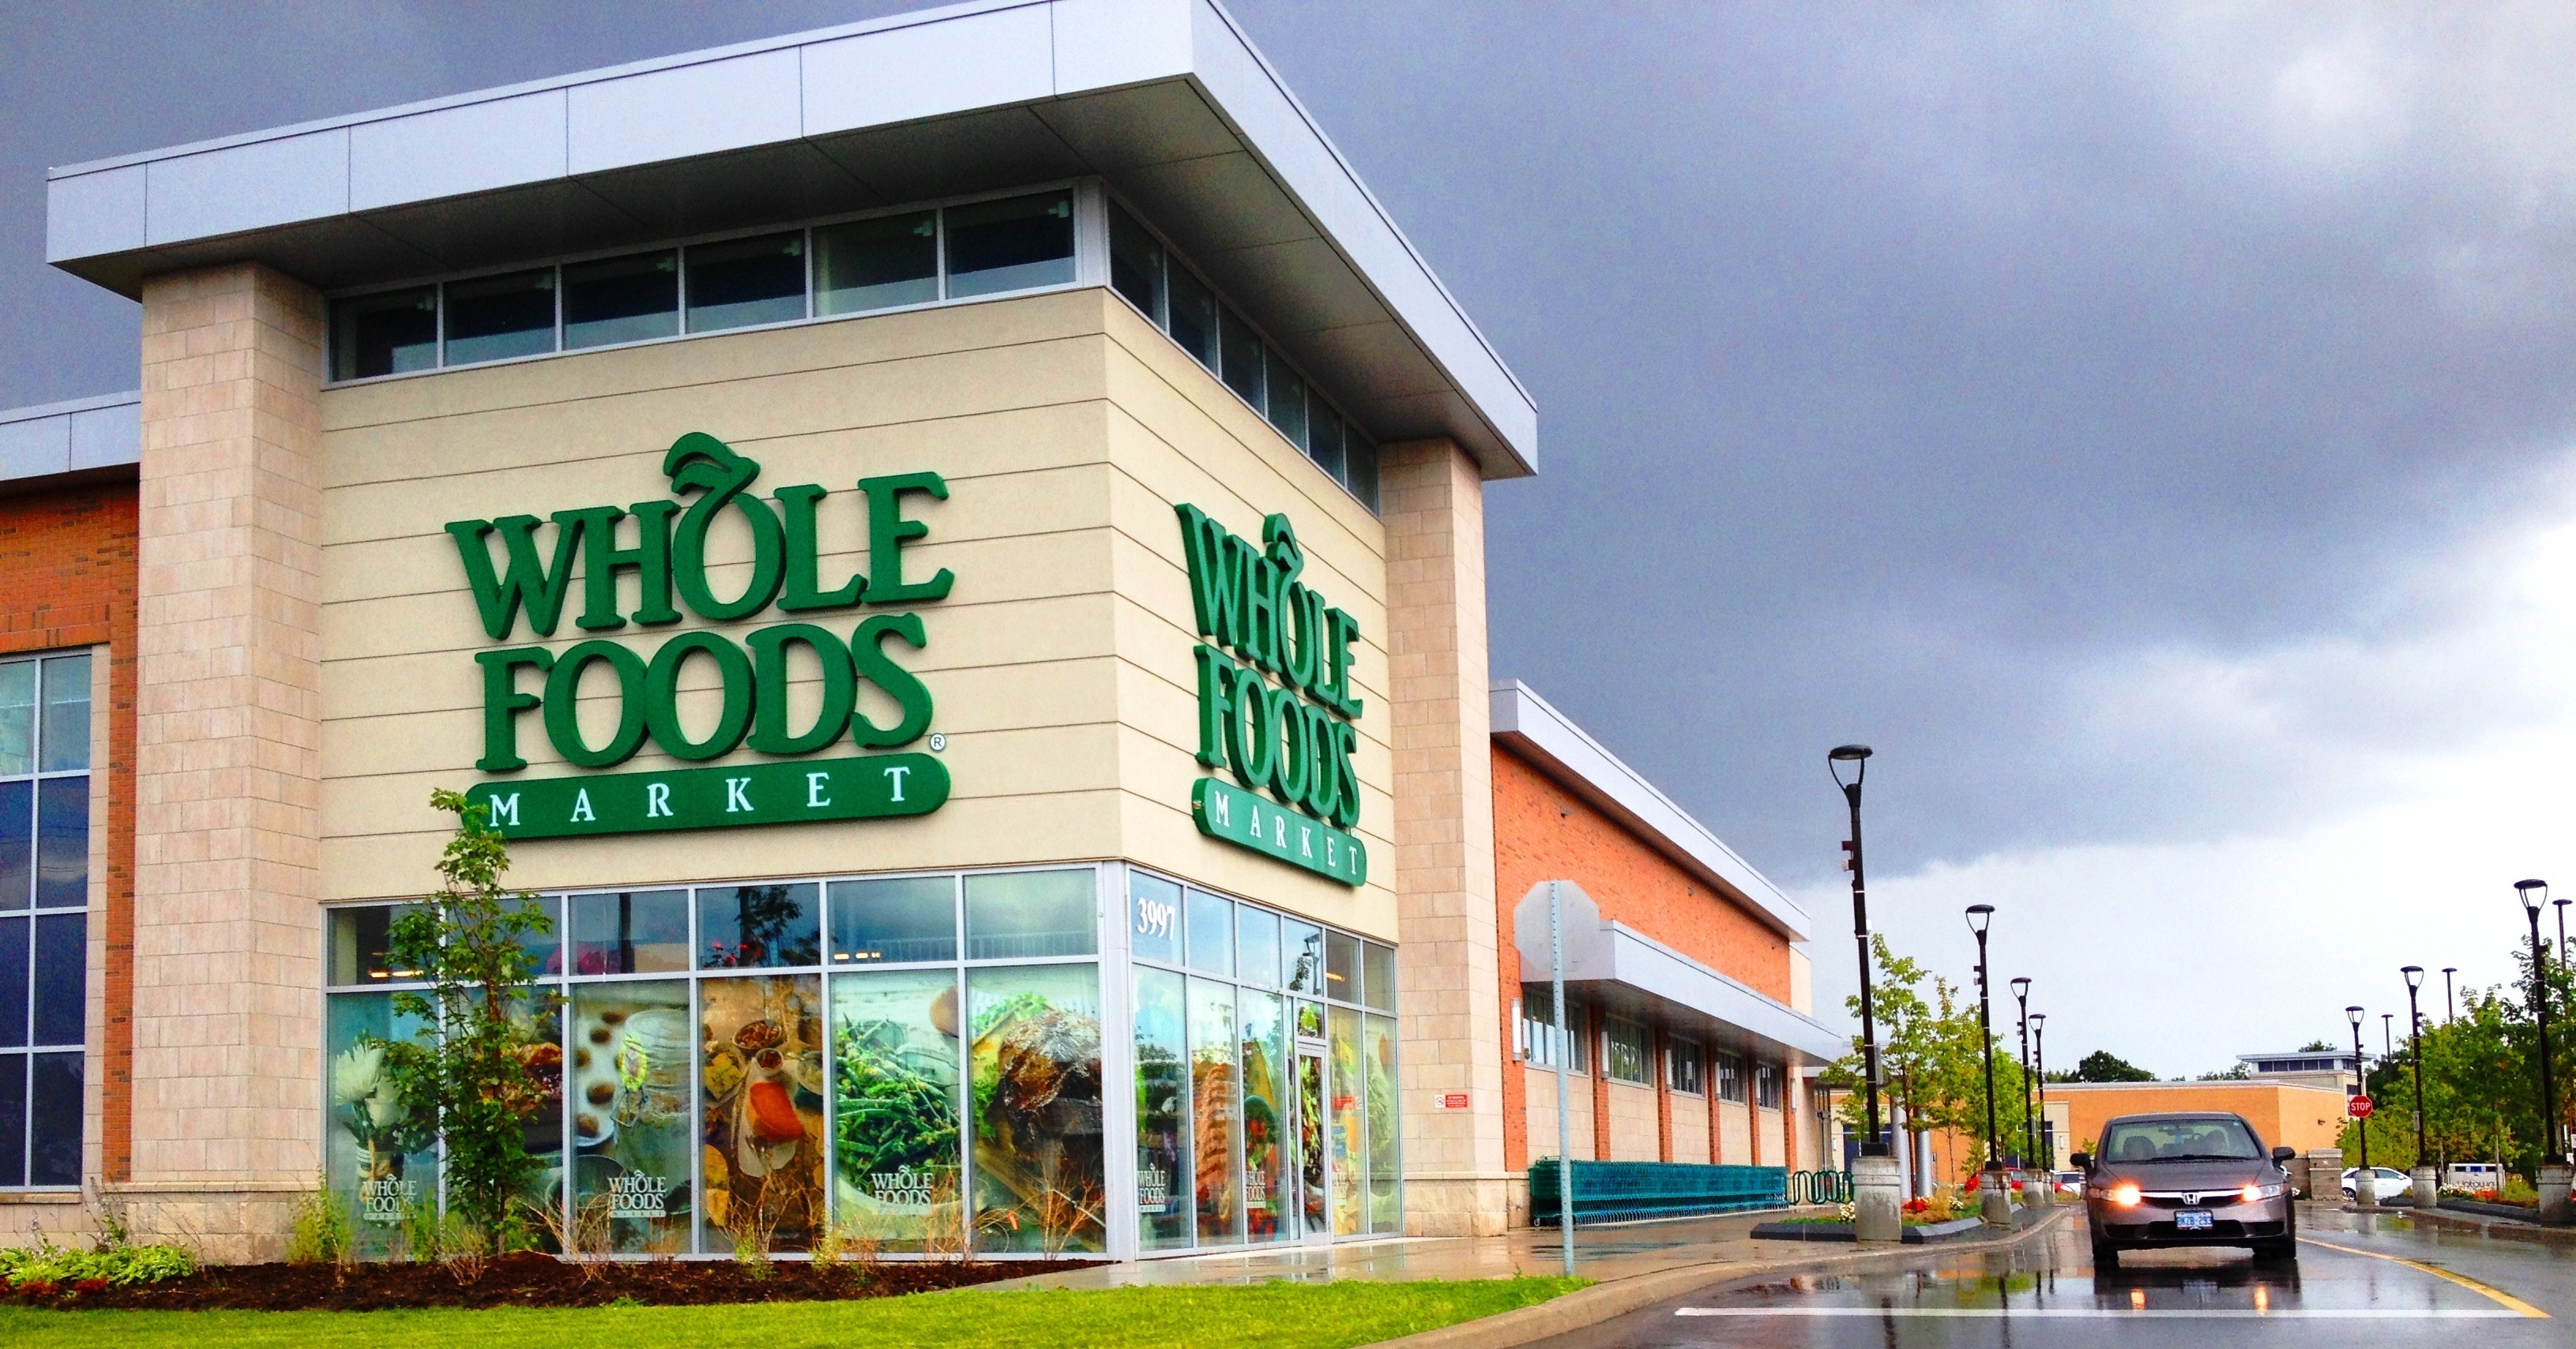 What Do Whole Foods’ Marketing Layoffs Mean for Its Brand? | The Spoon